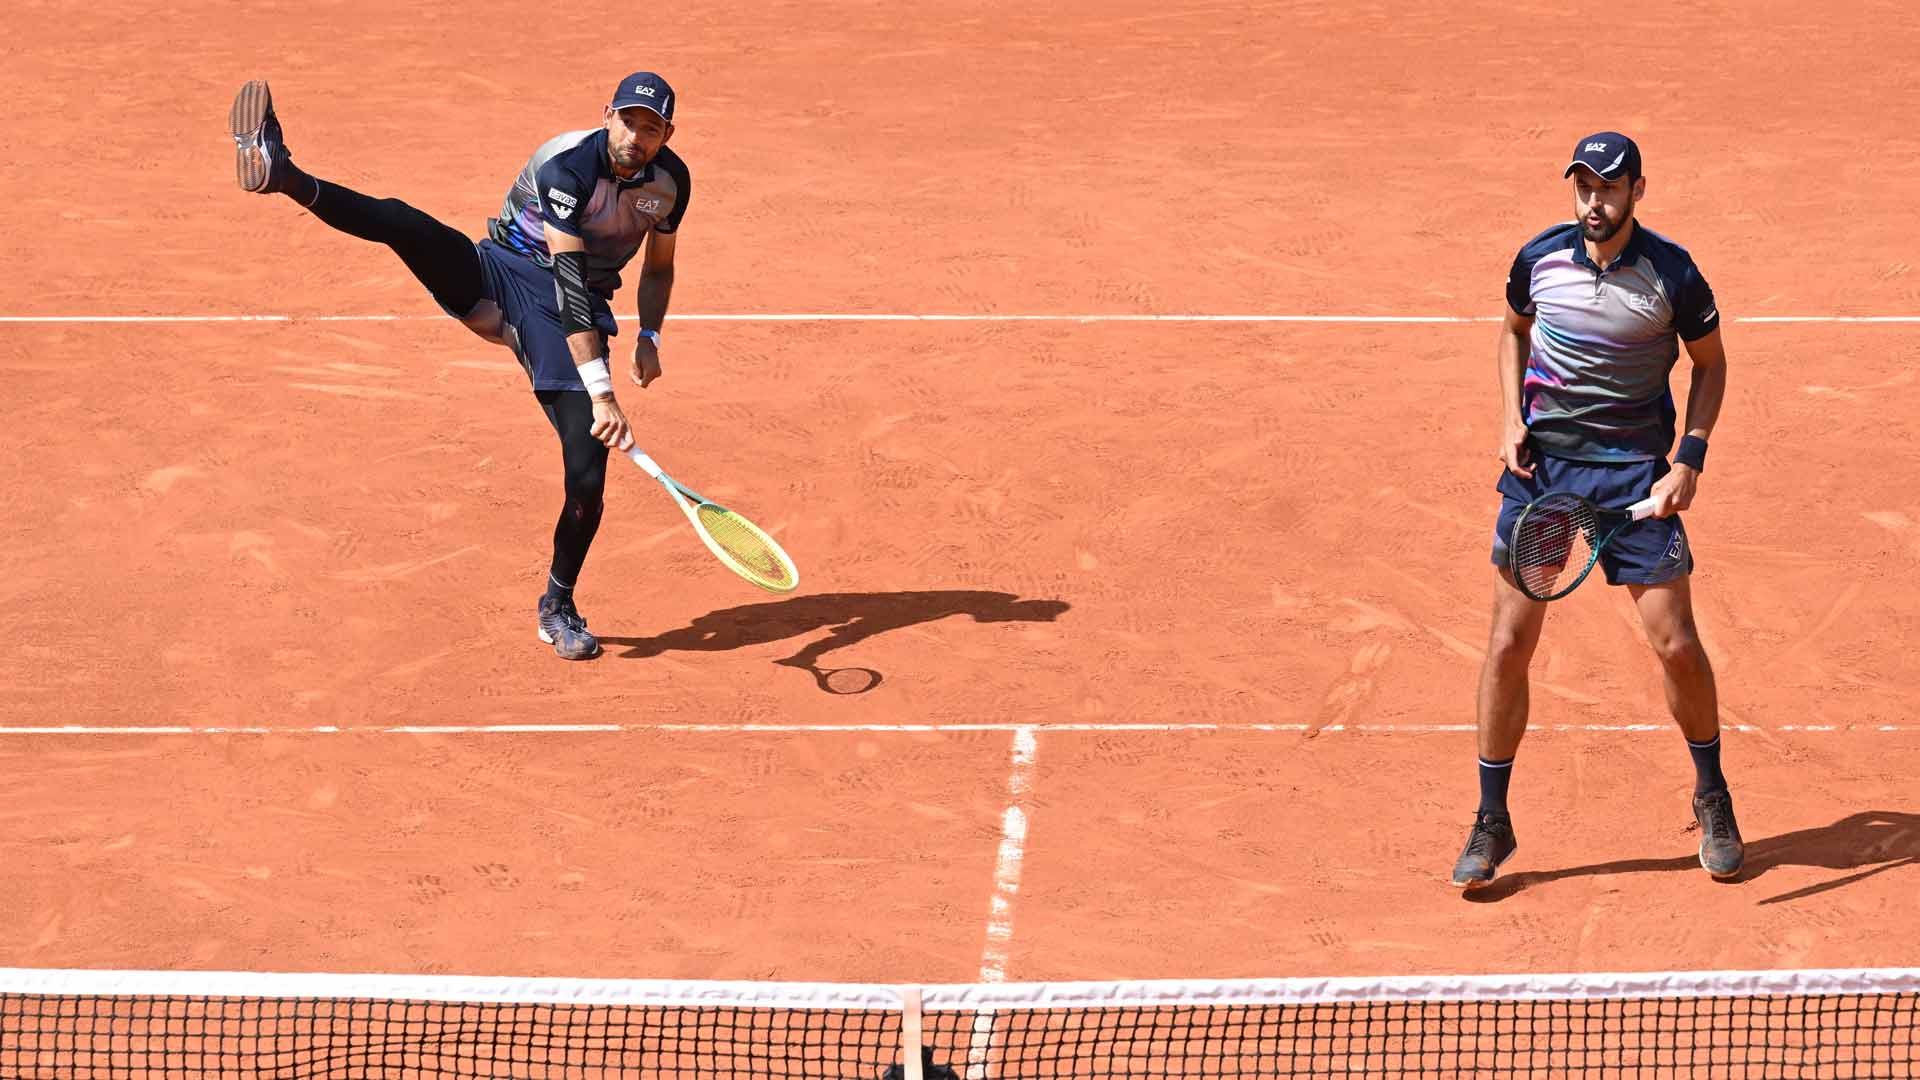 Arevalo/Pavic oust top seeds Granollers/Zeballos to reach Roland Garros final